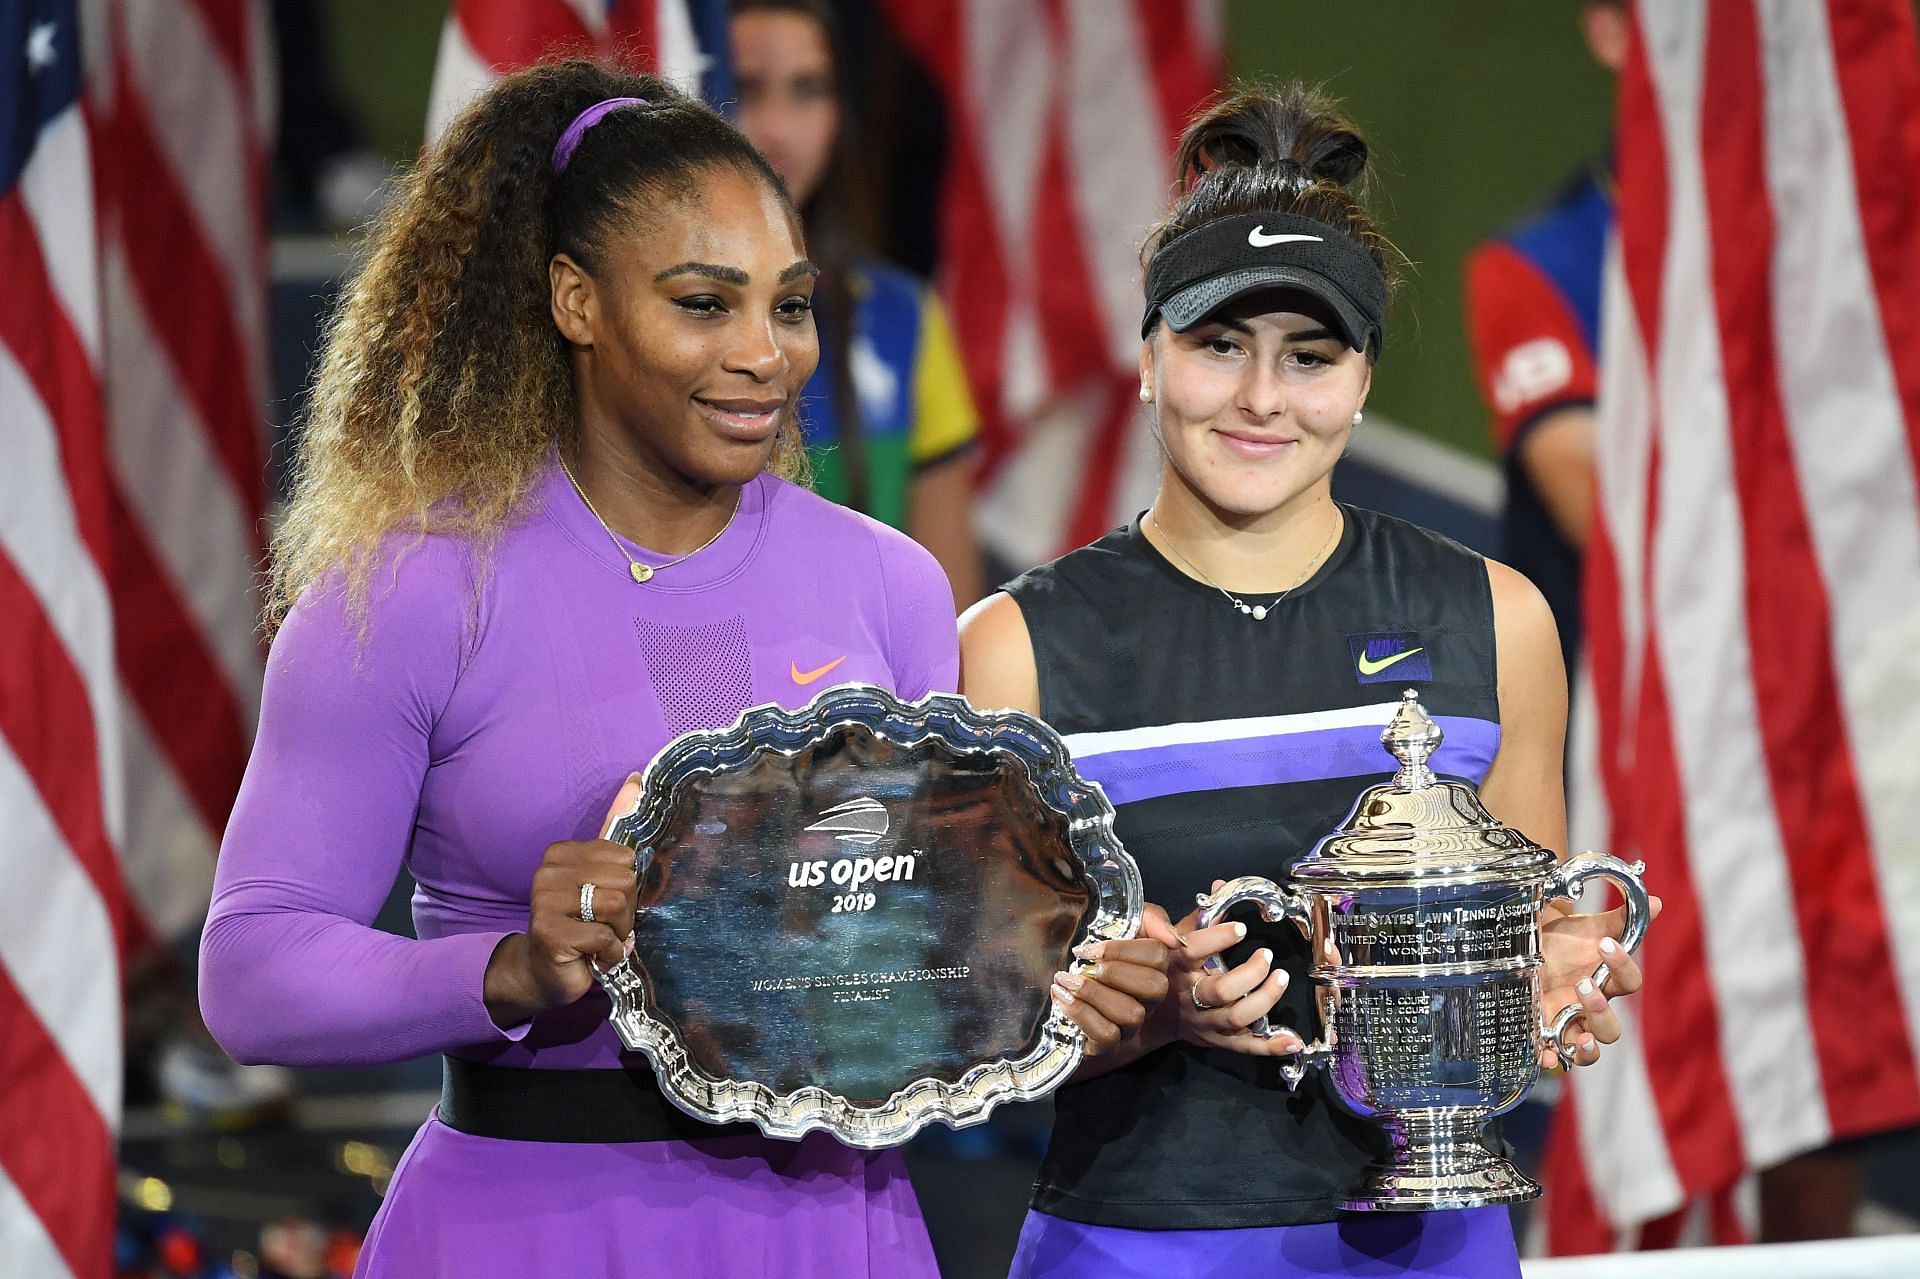 Bianca Andreescu defeated Serena Williams in the 2019 US Open final